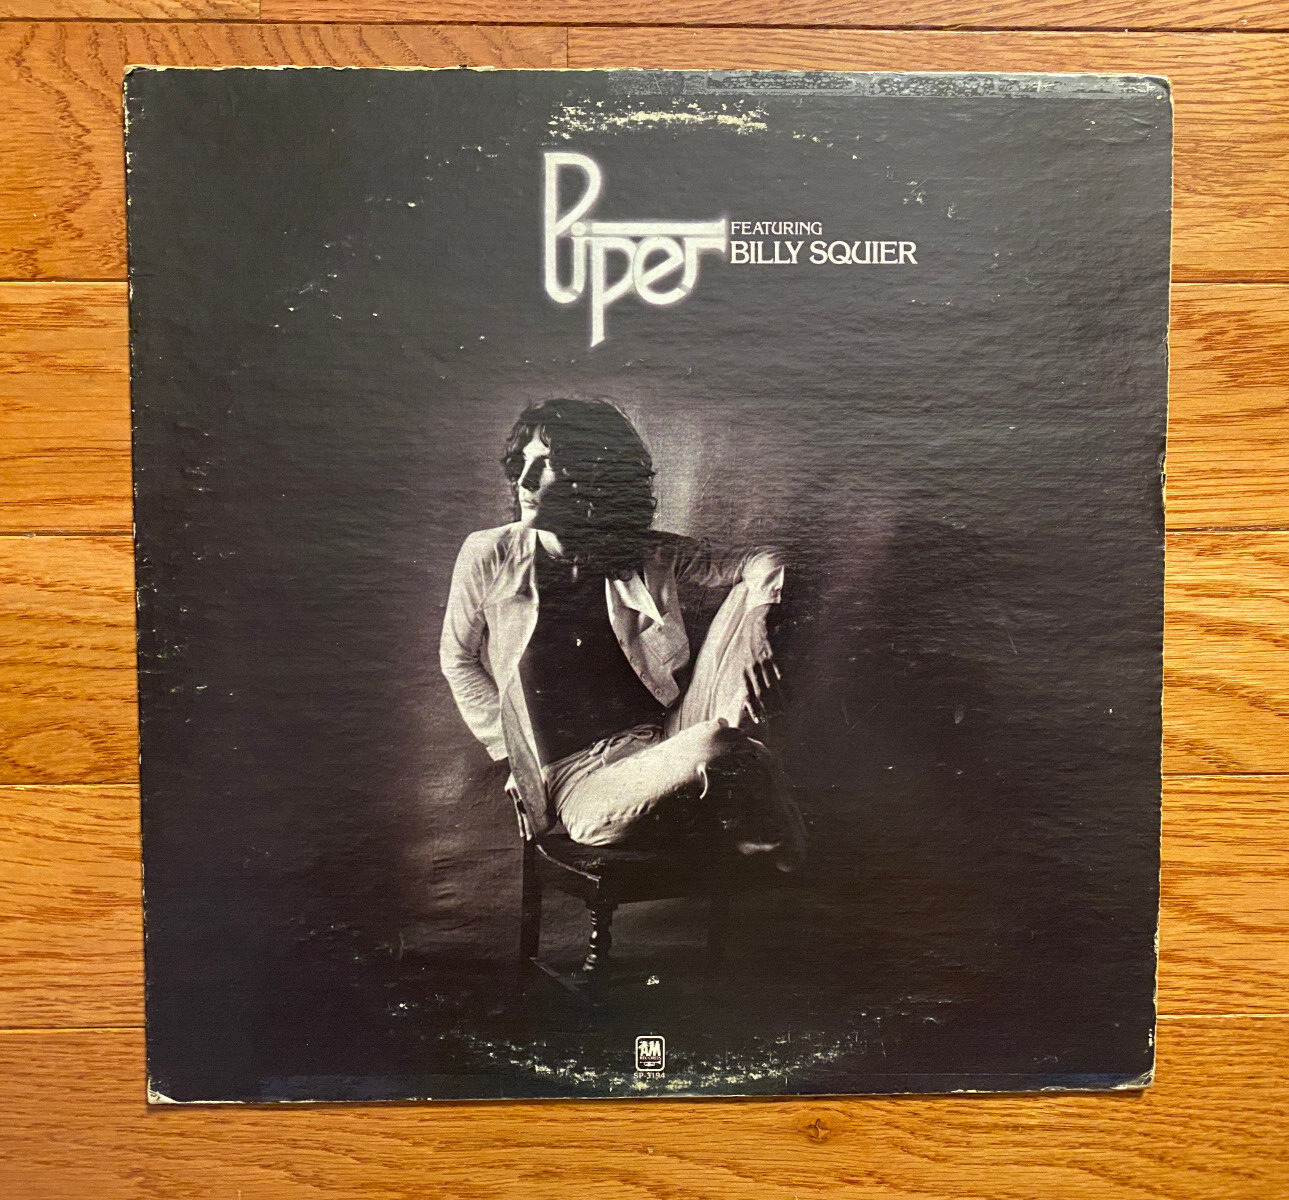 Piper - Self Titled LP A&M SP-3194 1982 Pressing Billy Squier